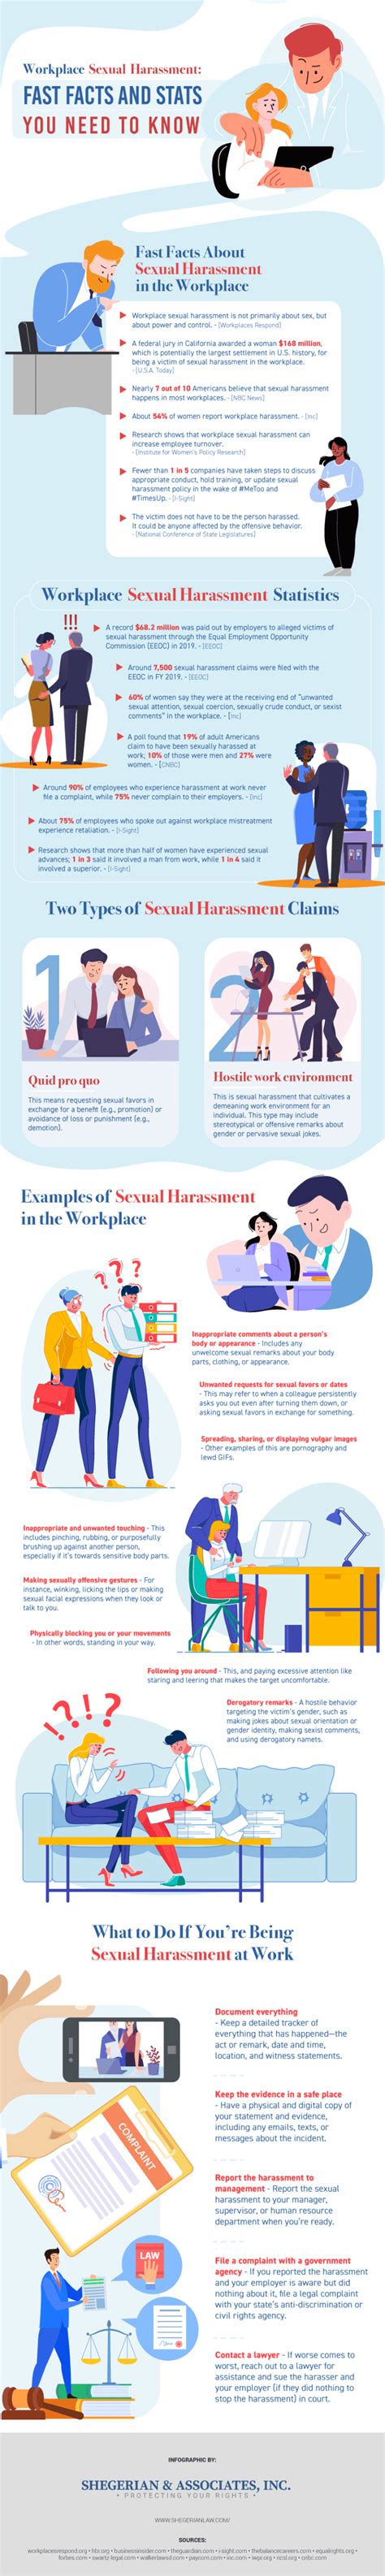 Workplace Sexual Harassment Fast Facts And Stats You Need To Know E